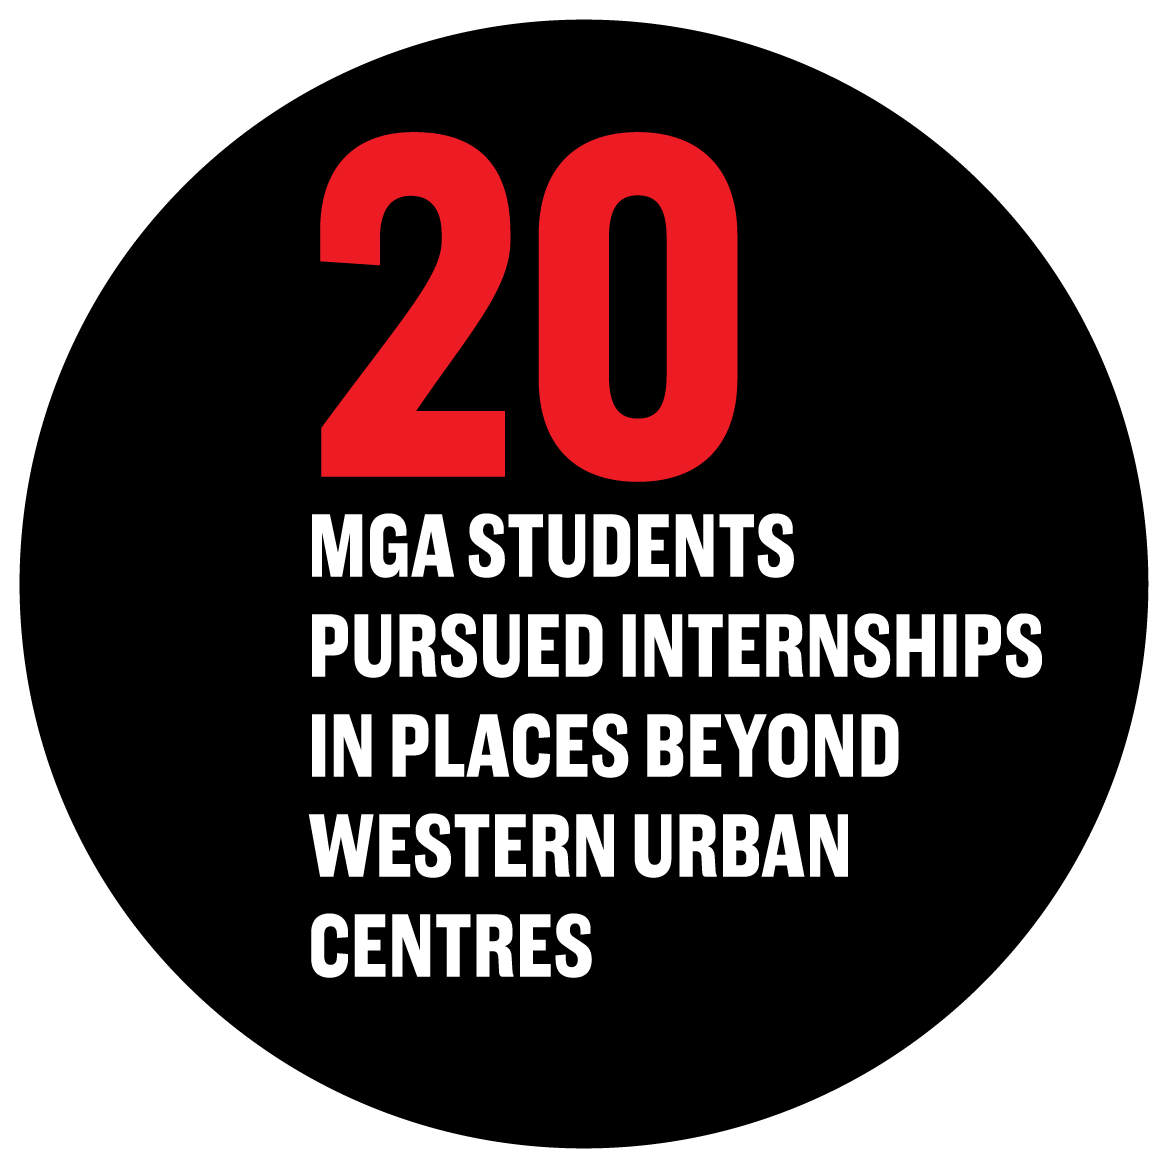 20 MGA students pursued internships in places beyond western urban centres.